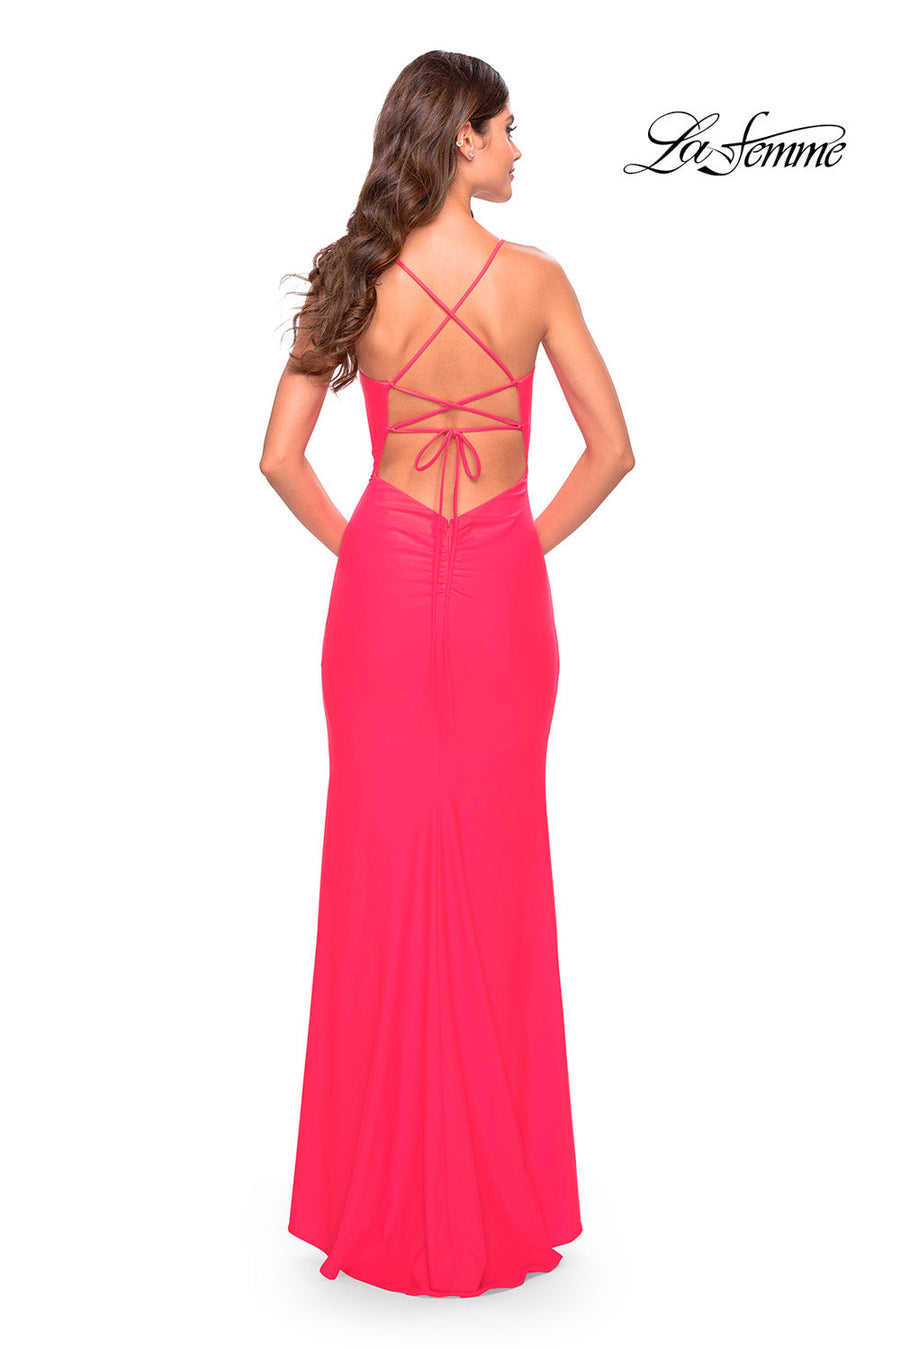 La Femme 31504 prom dress images.  La Femme 31504 is available in these colors: Hot Coral.